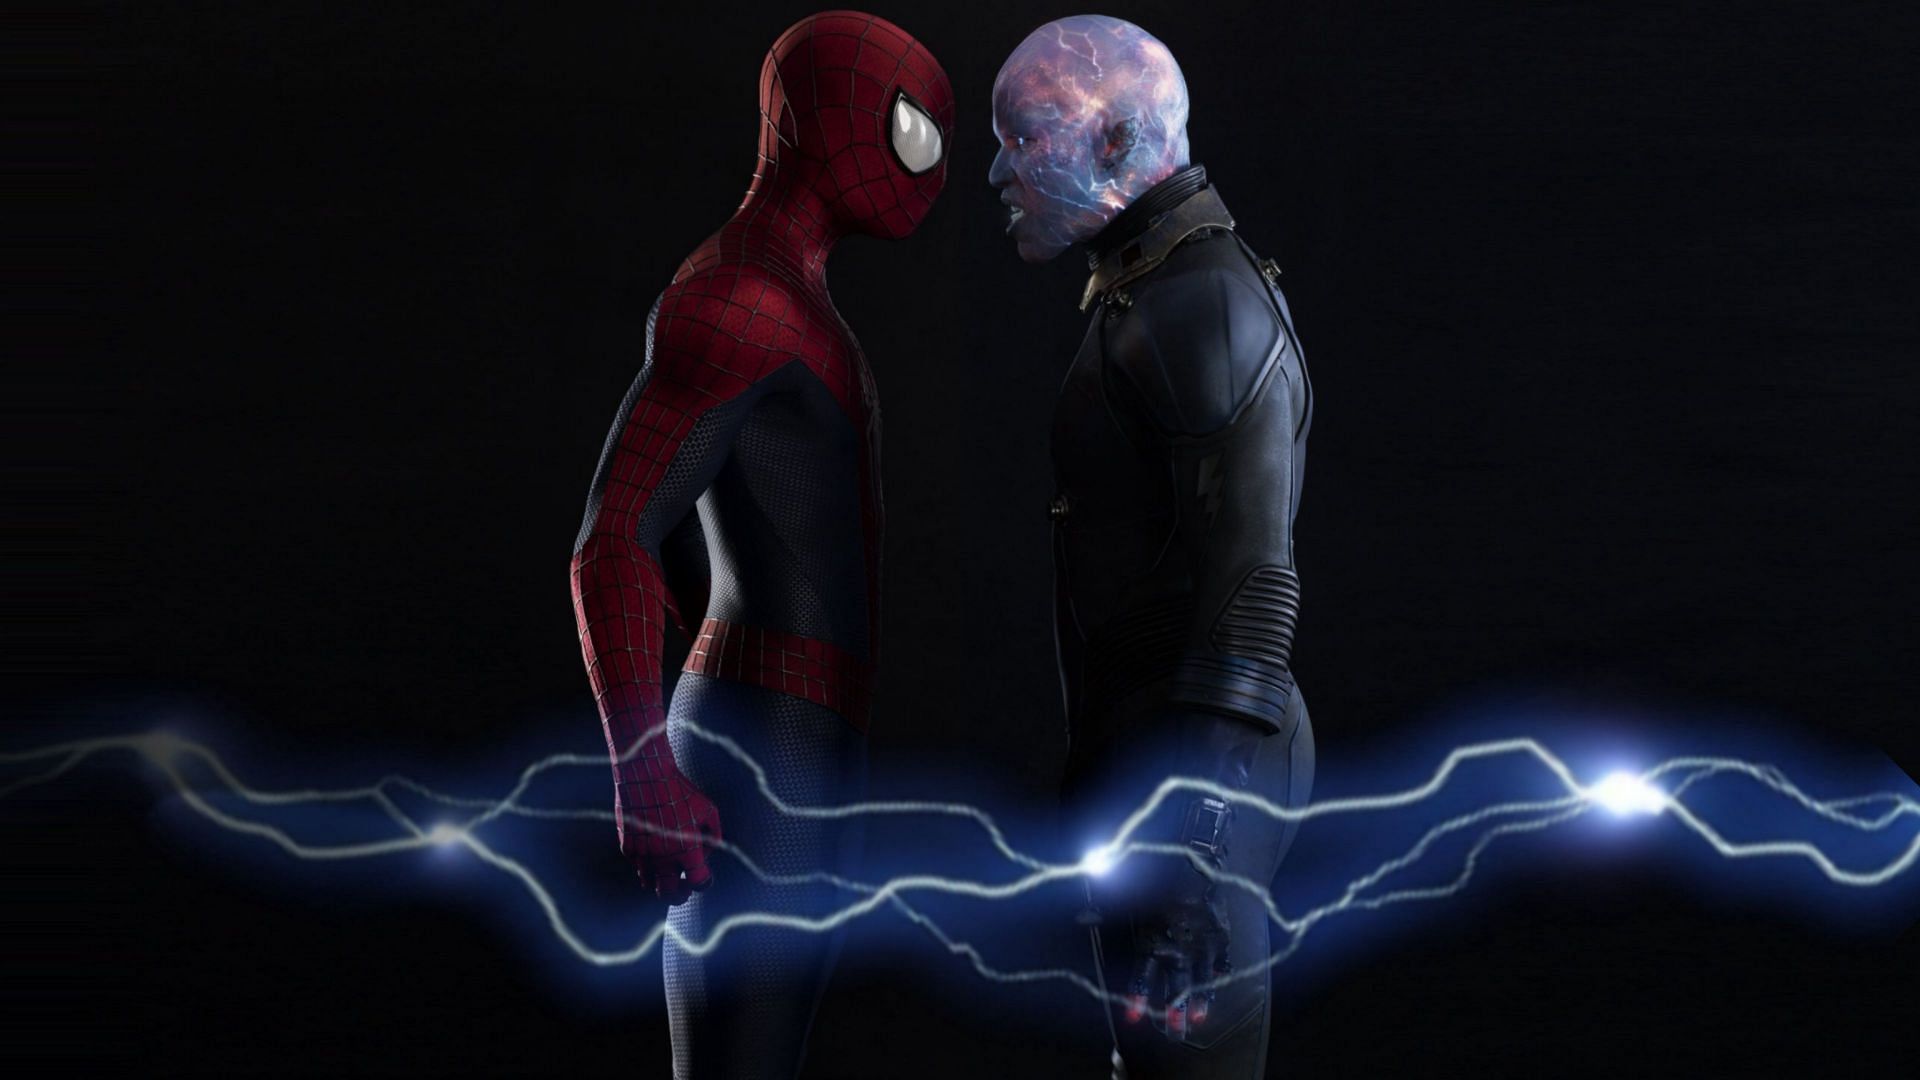 The fight between Spider-Man and Electro in the 2014 film &quot;The Amazing Spider-Man 2&quot; was epic. (Image Via Sportskeeda)